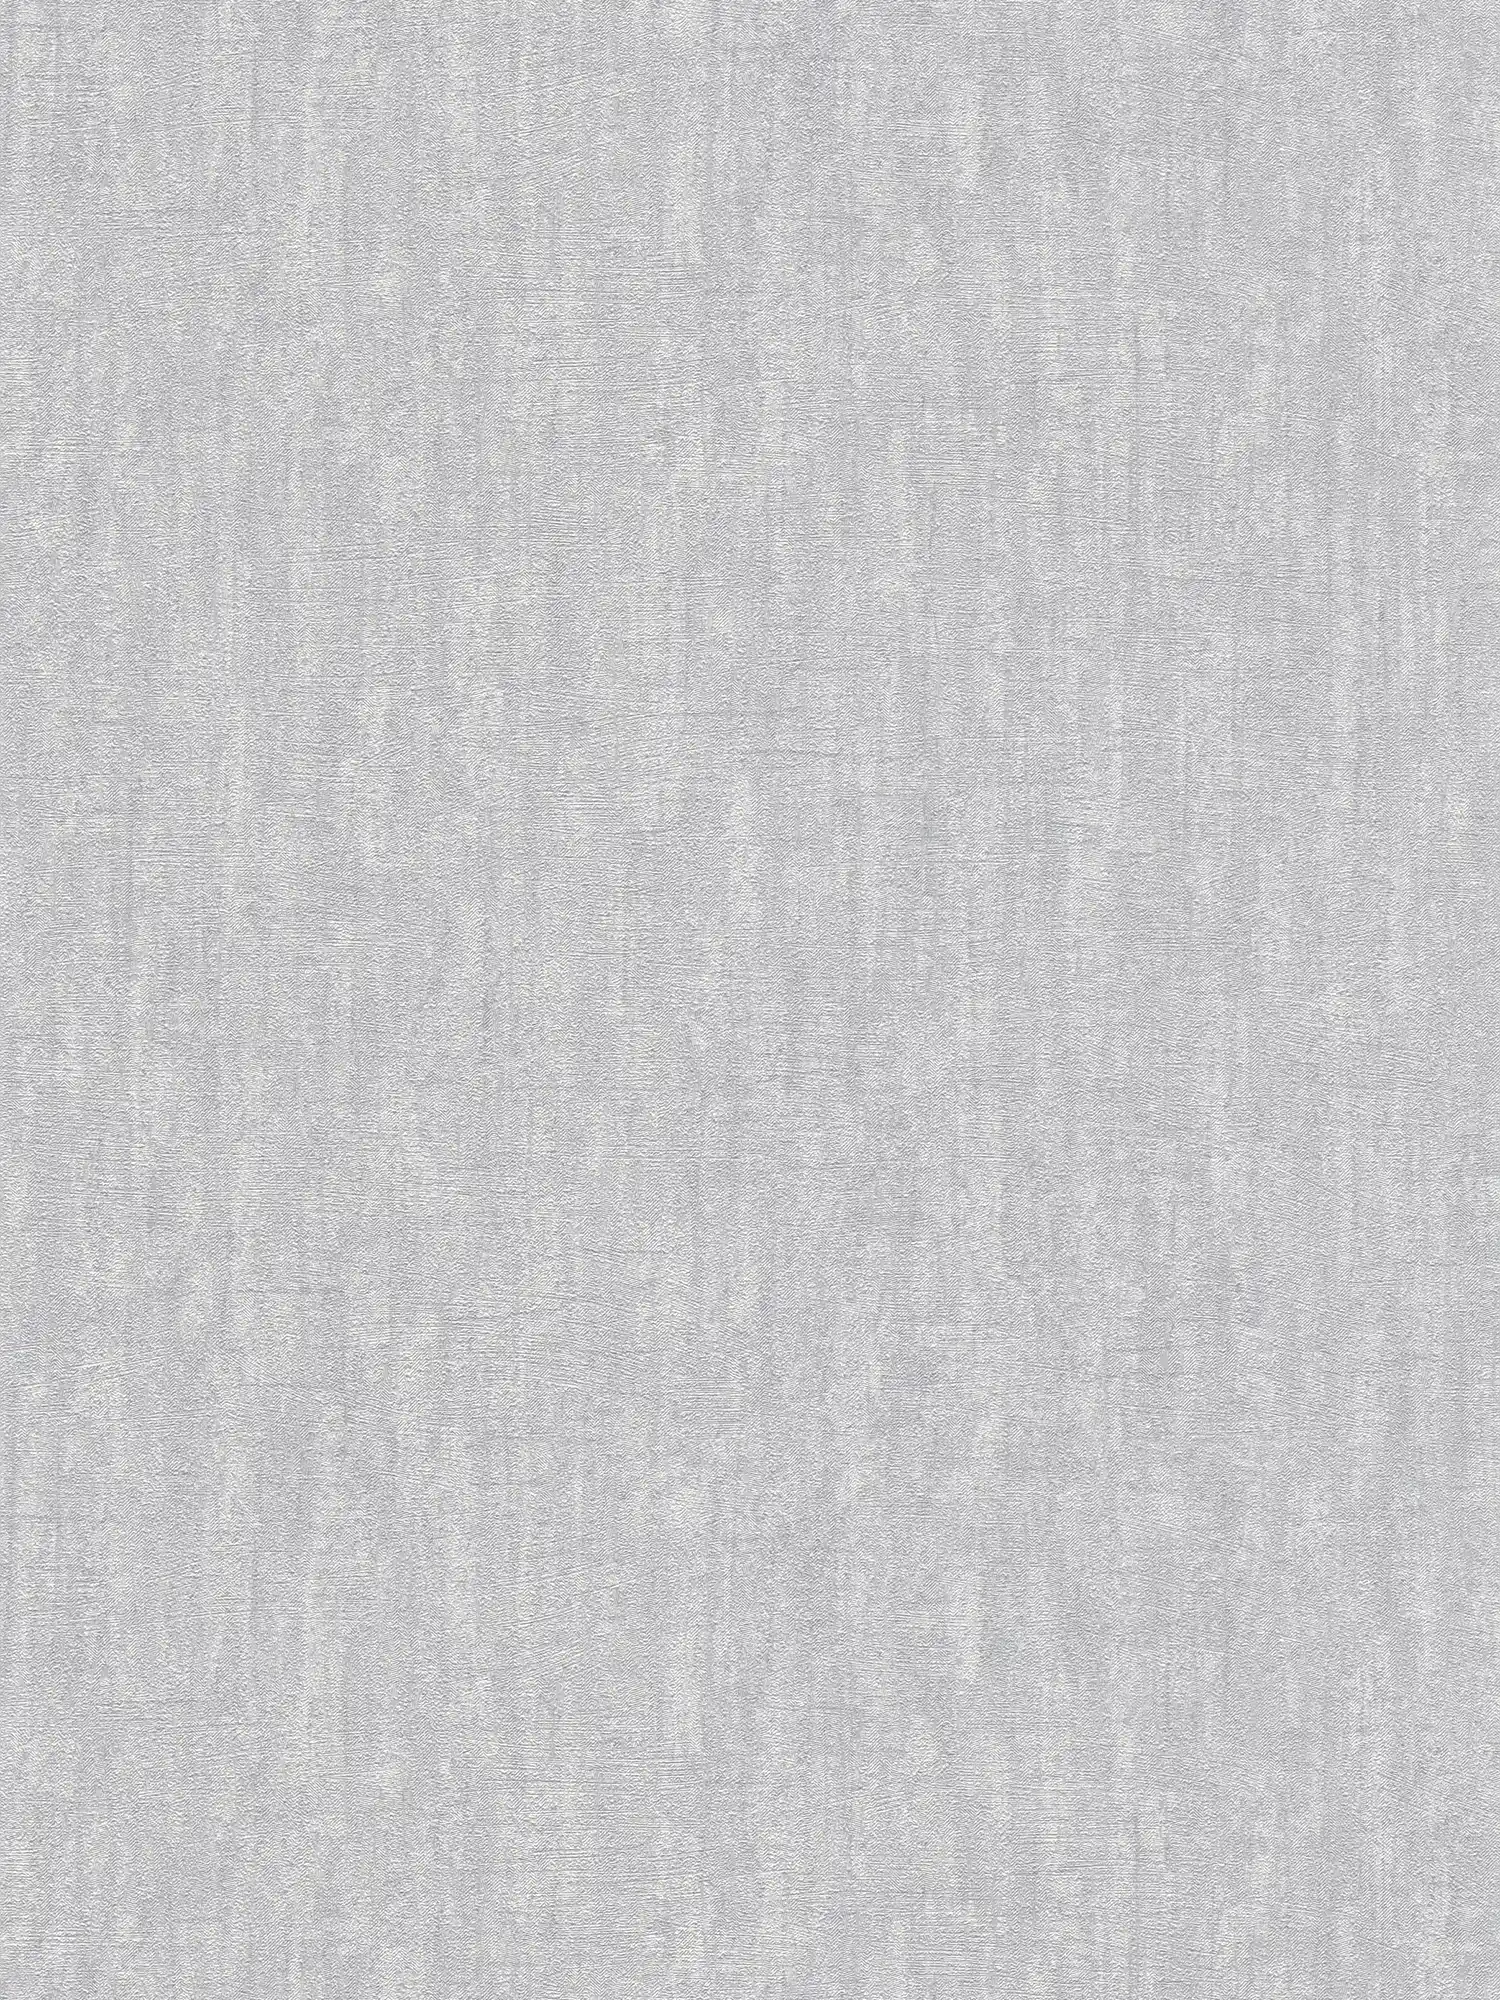 Light grey wallpaper with textured pattern, glossy - grey
